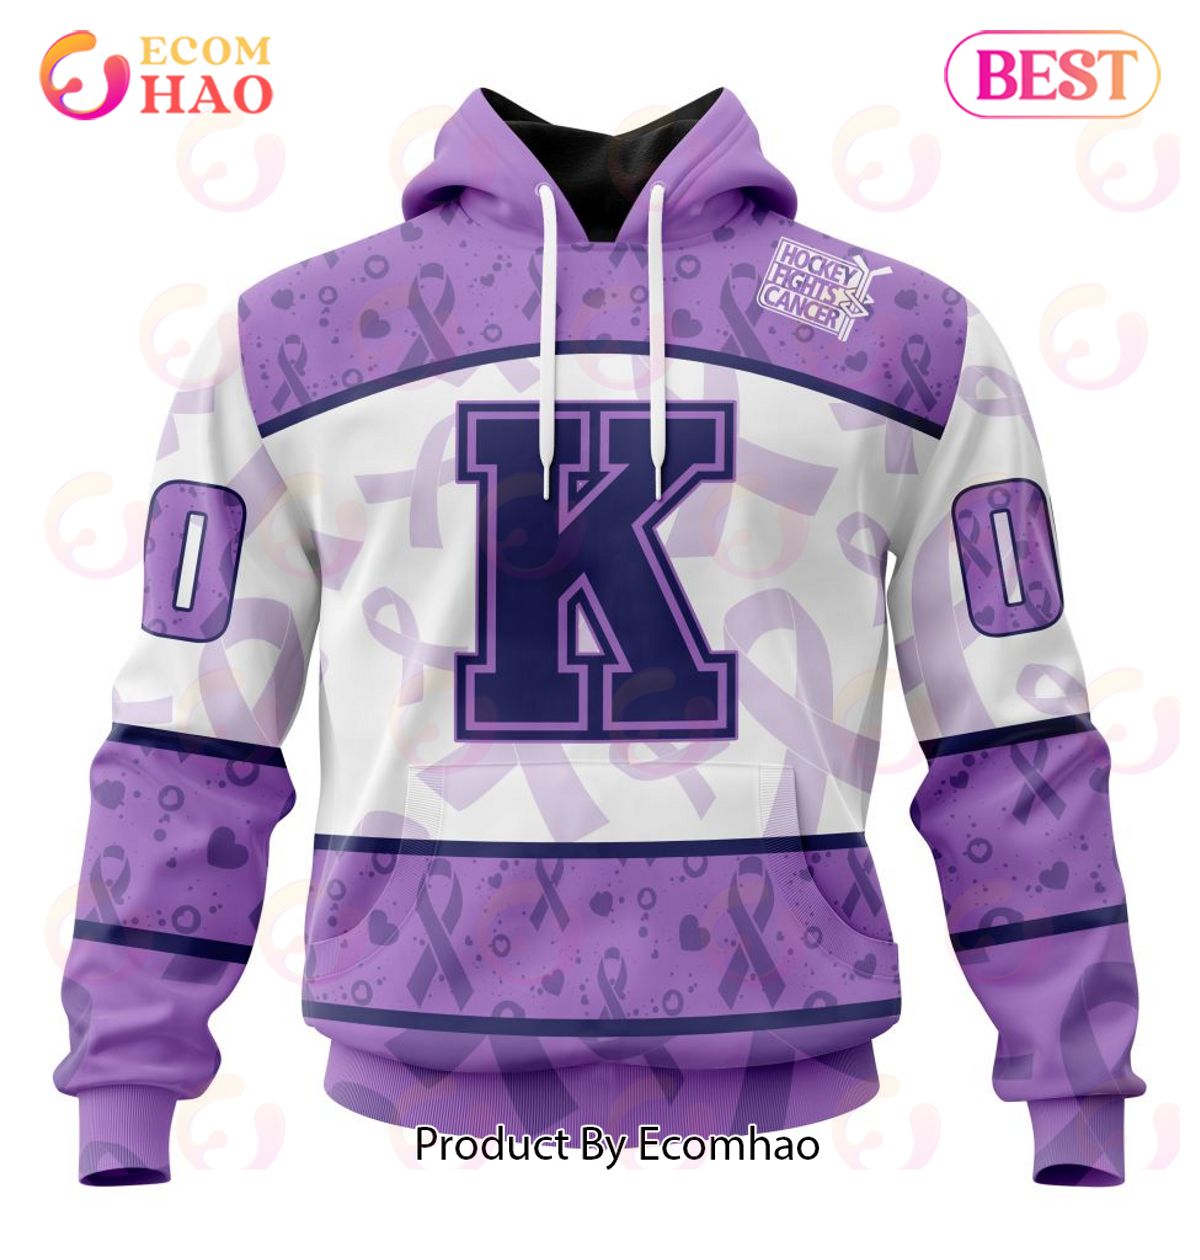 OHL Kingston Frontenacs Special Lavender Fight Cancer 3D Hoodie